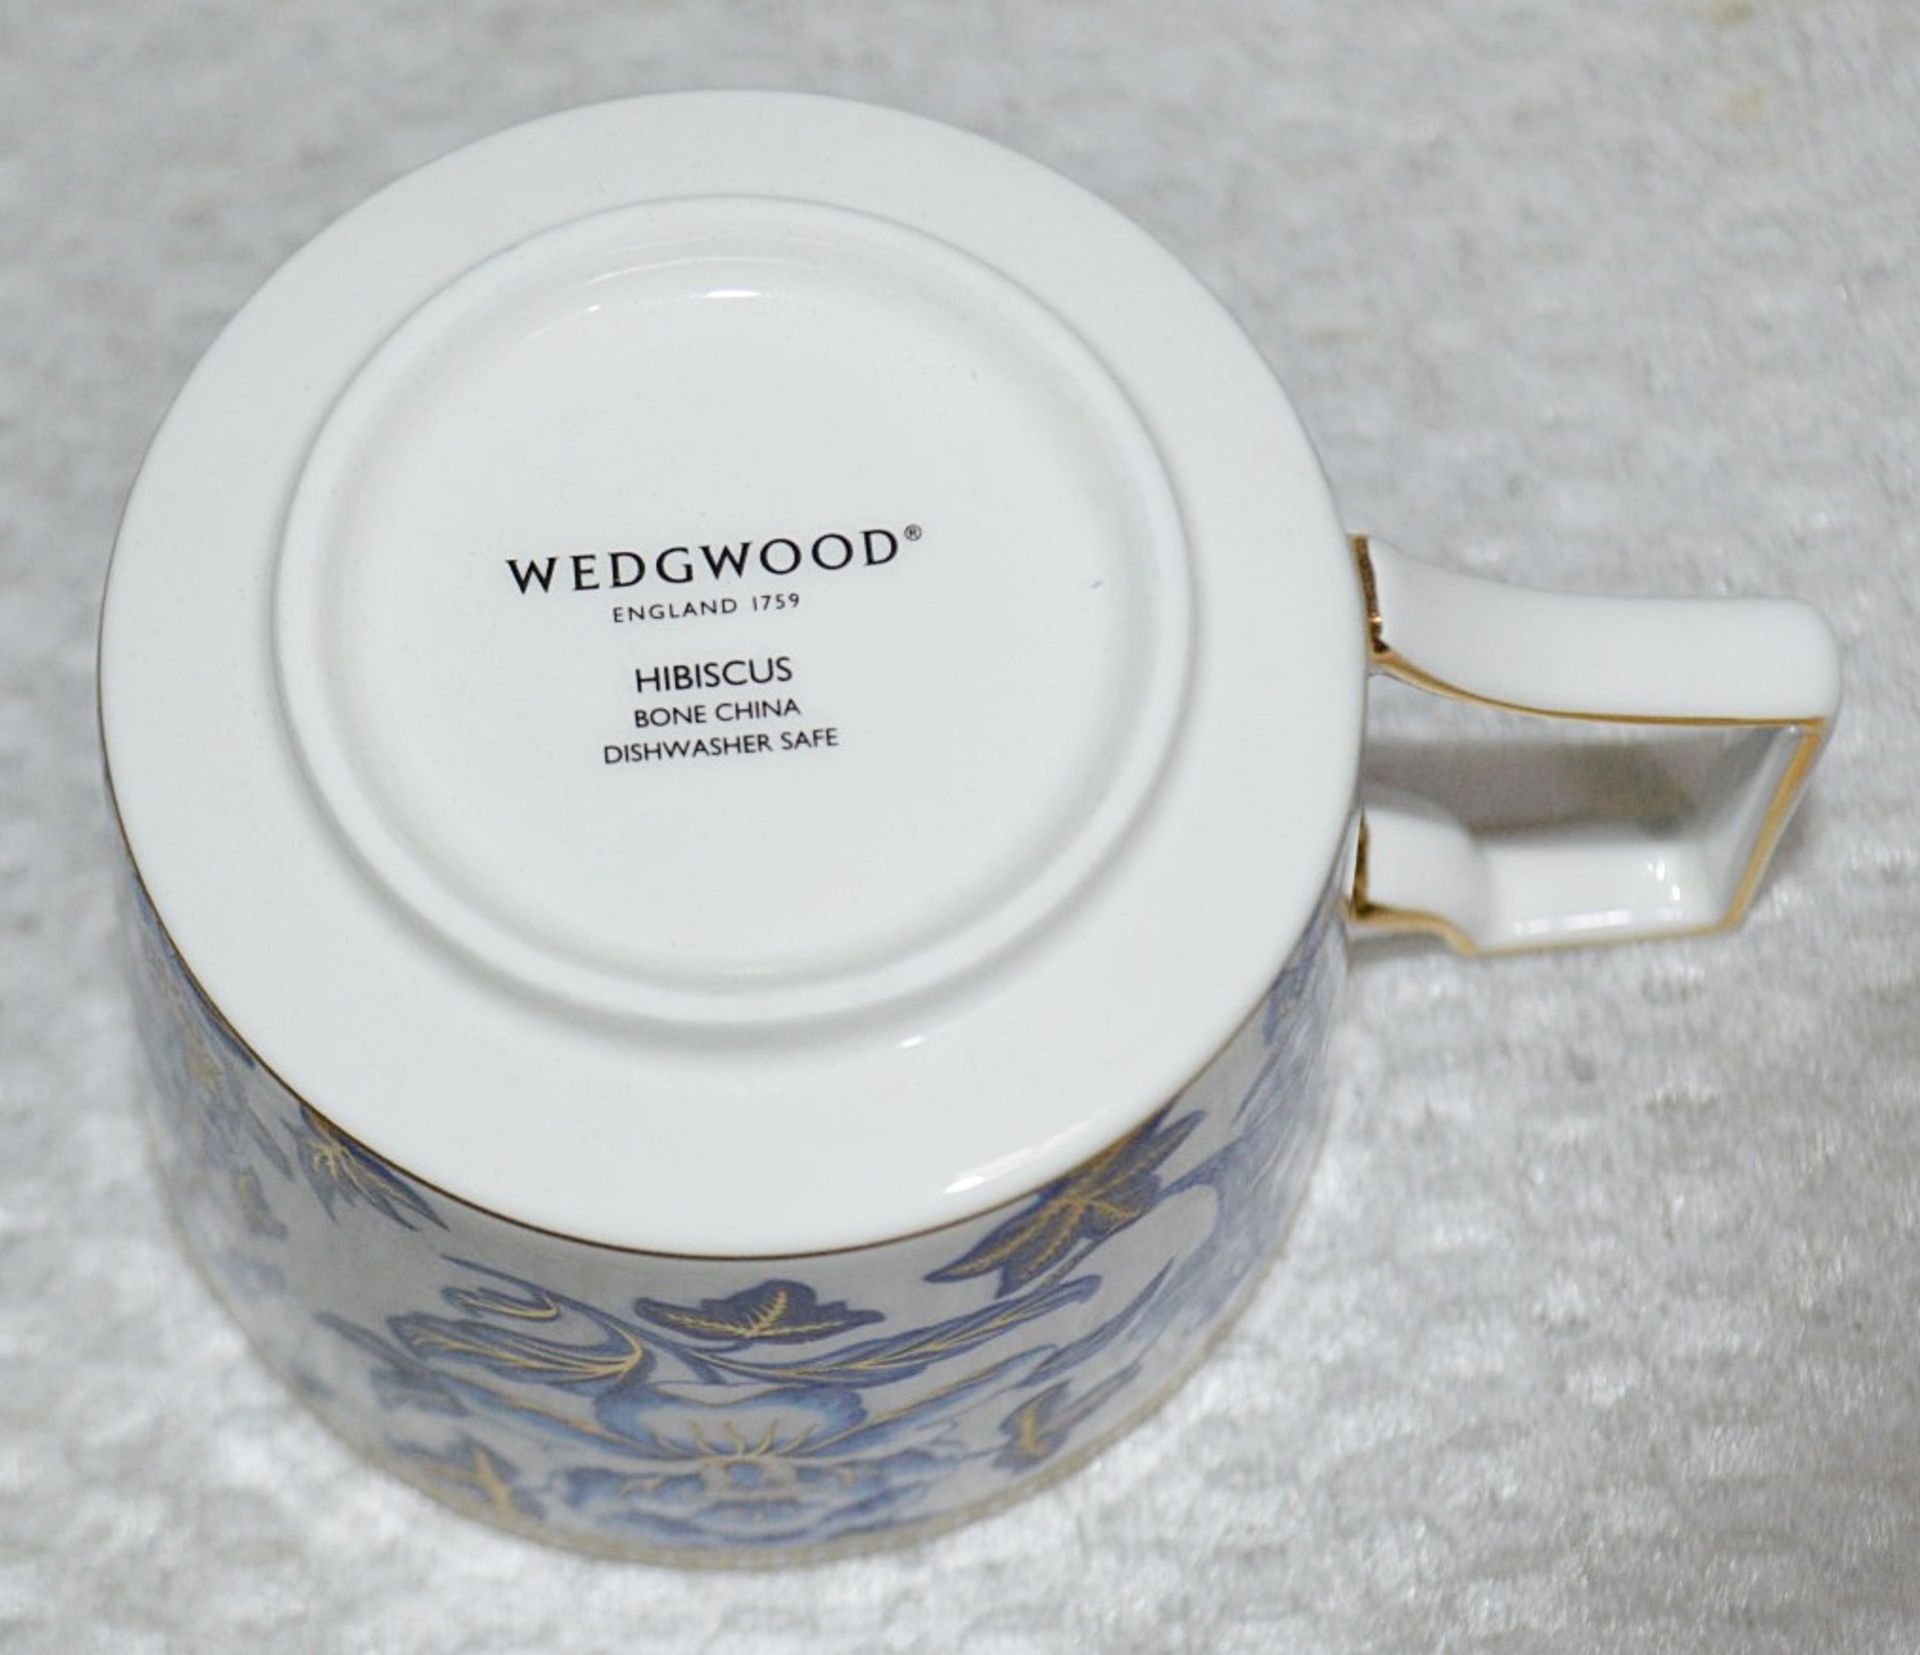 1 x WEDGWOOD 'Hibiscus' Bone China Teacup and Saucer - Original RRP £75.00 - Unused Boxed Stock - - Image 8 of 10